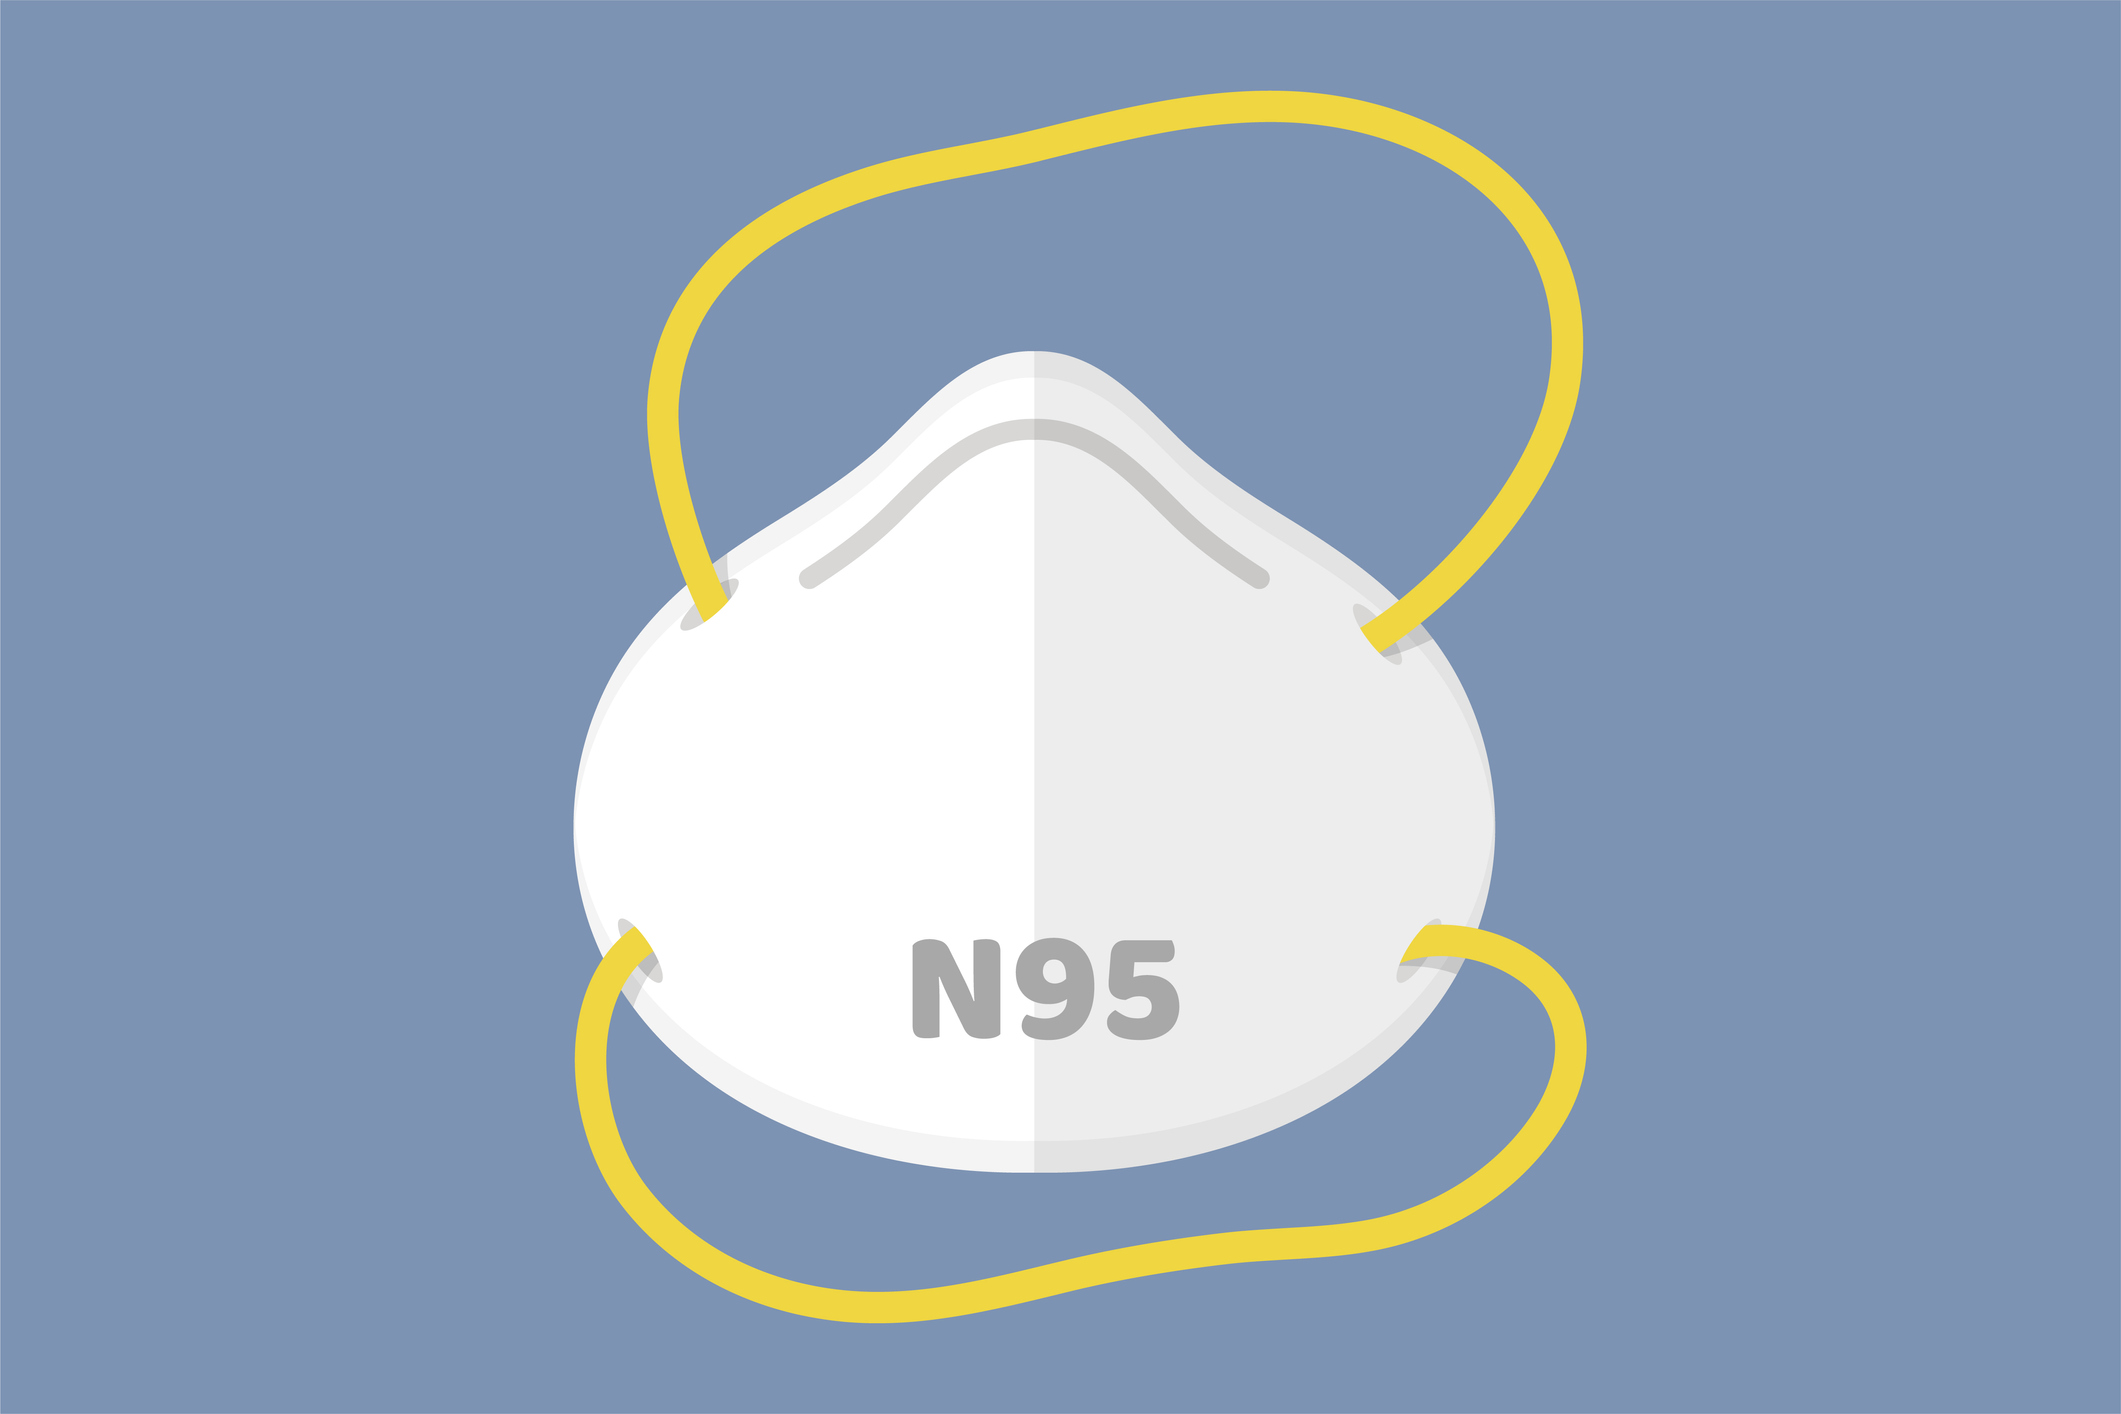 How to Find N95 Masks If You’re